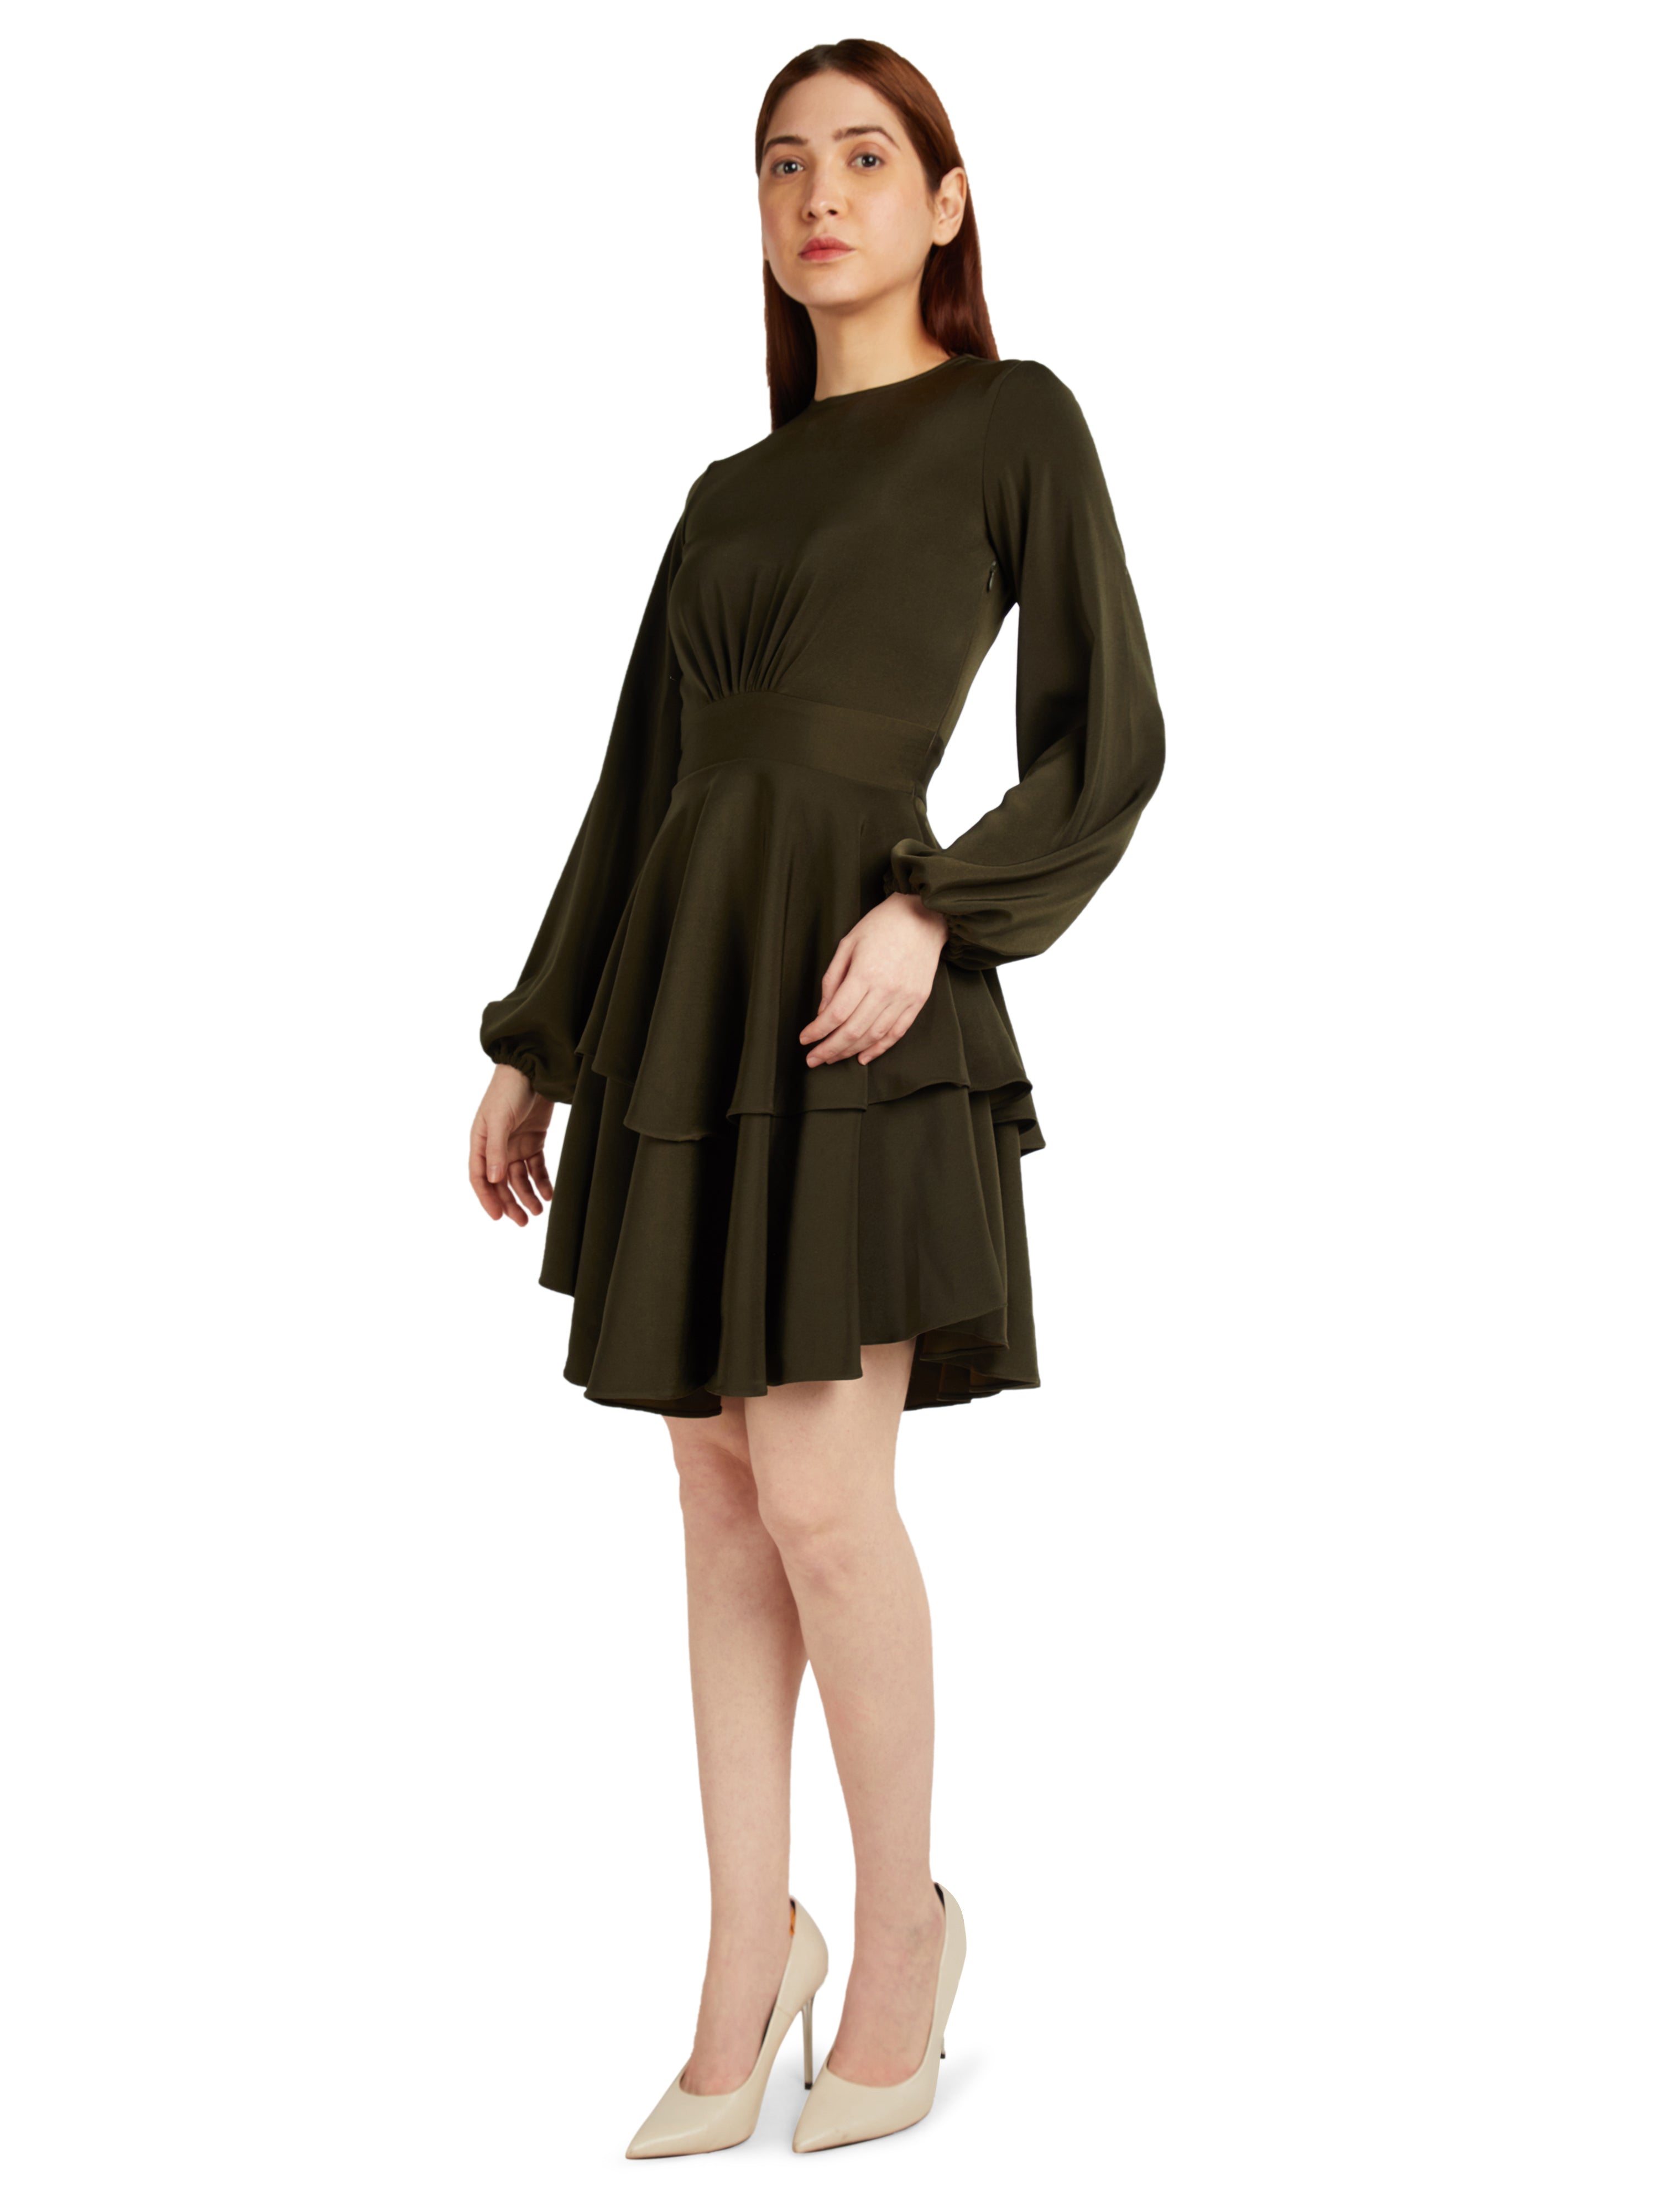 FULL SLEEVE FIT AND FLARE DRESS WITH LAYER DETAIL